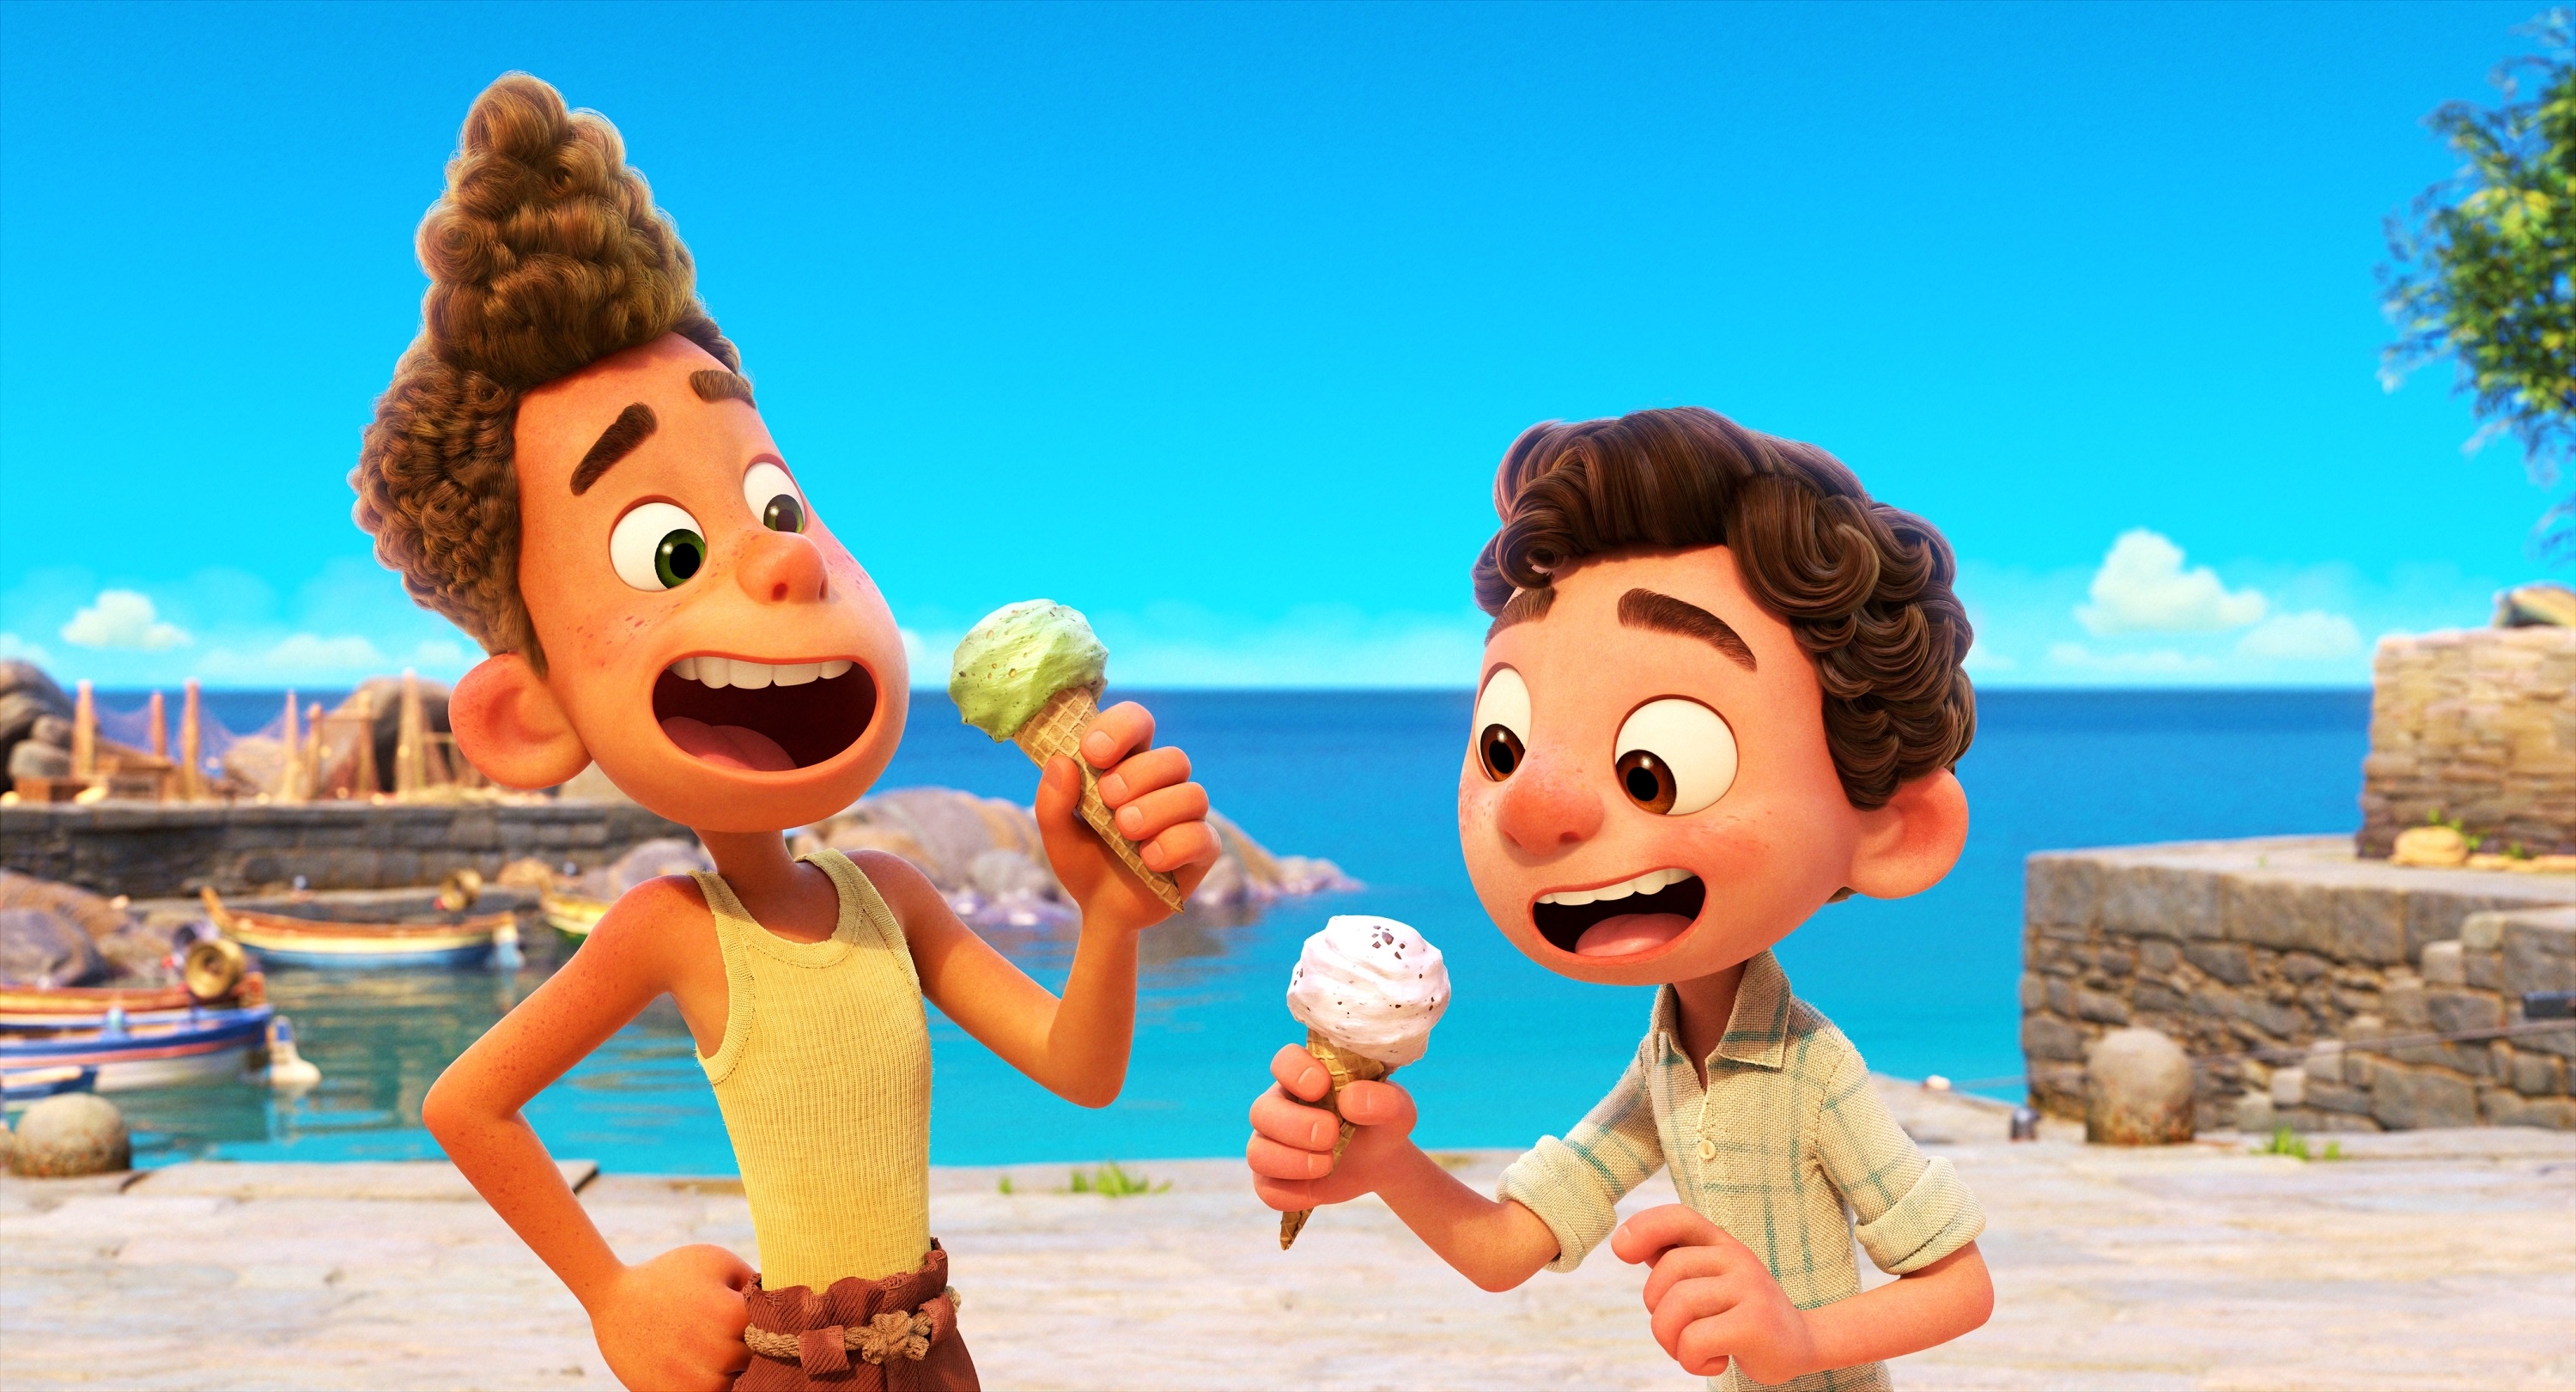 Alberto and Luca eating ice cream in the Luca movie